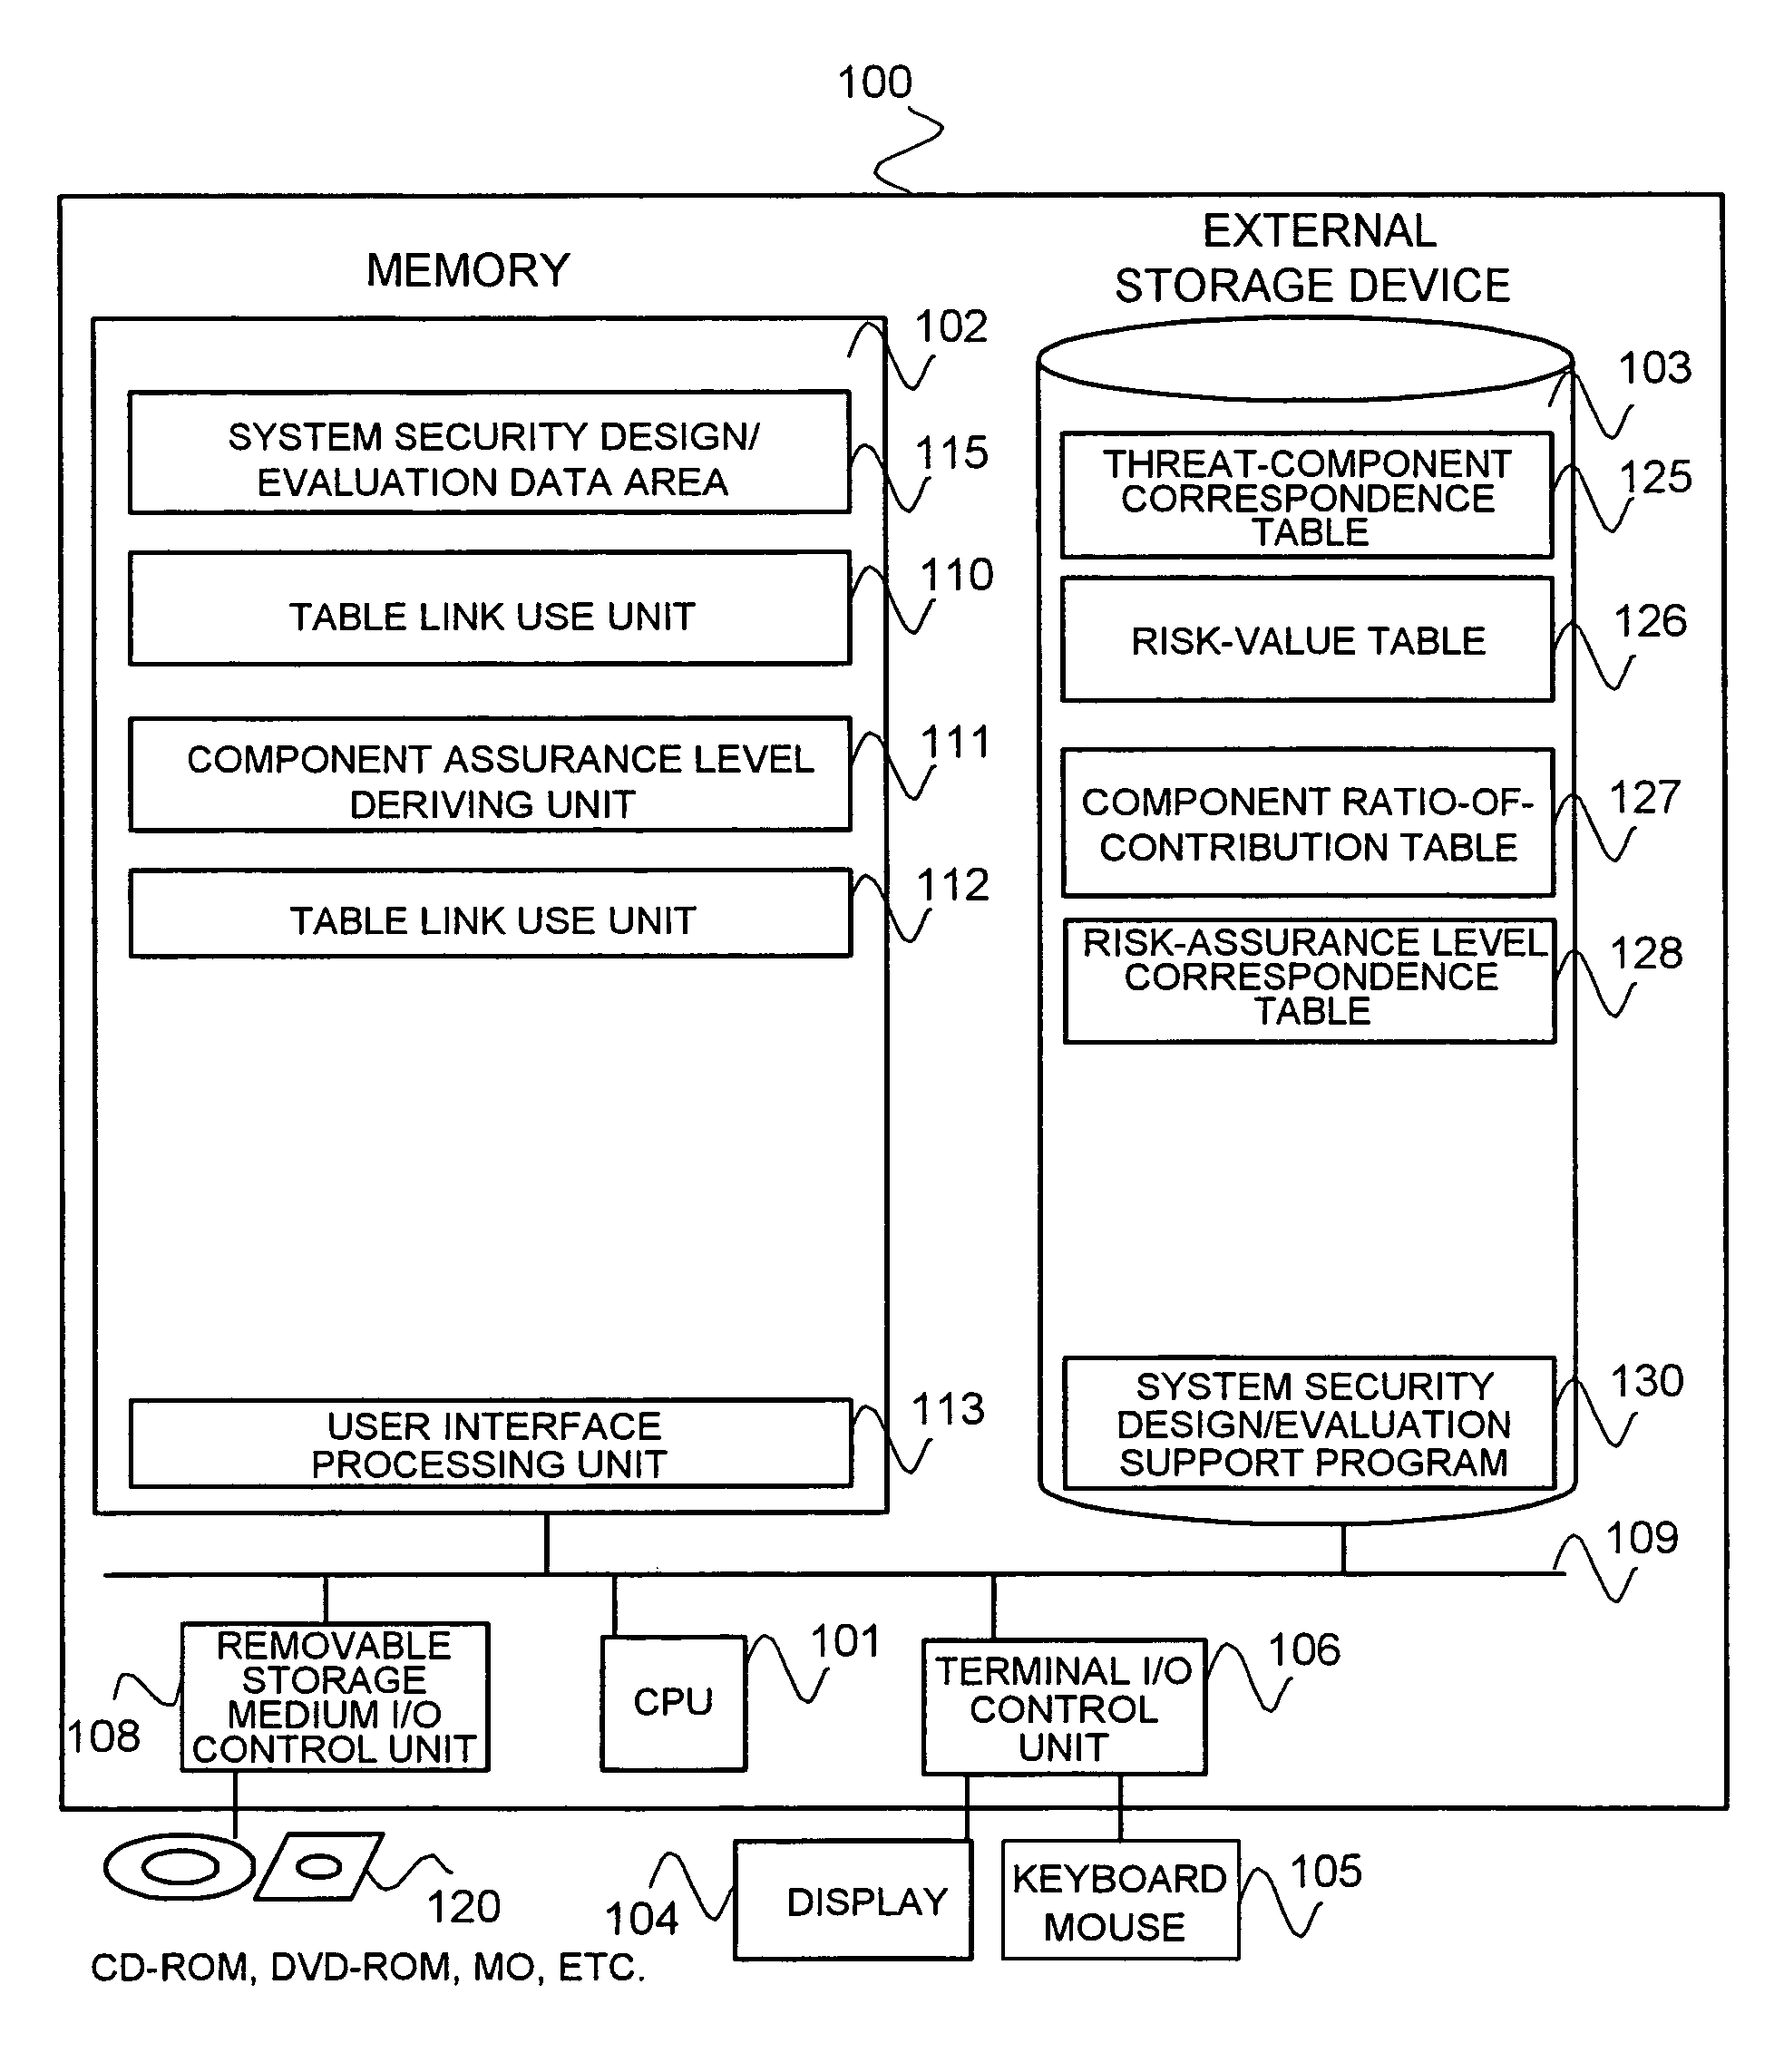 Tool, method, and program for supporting system security design/evaluation